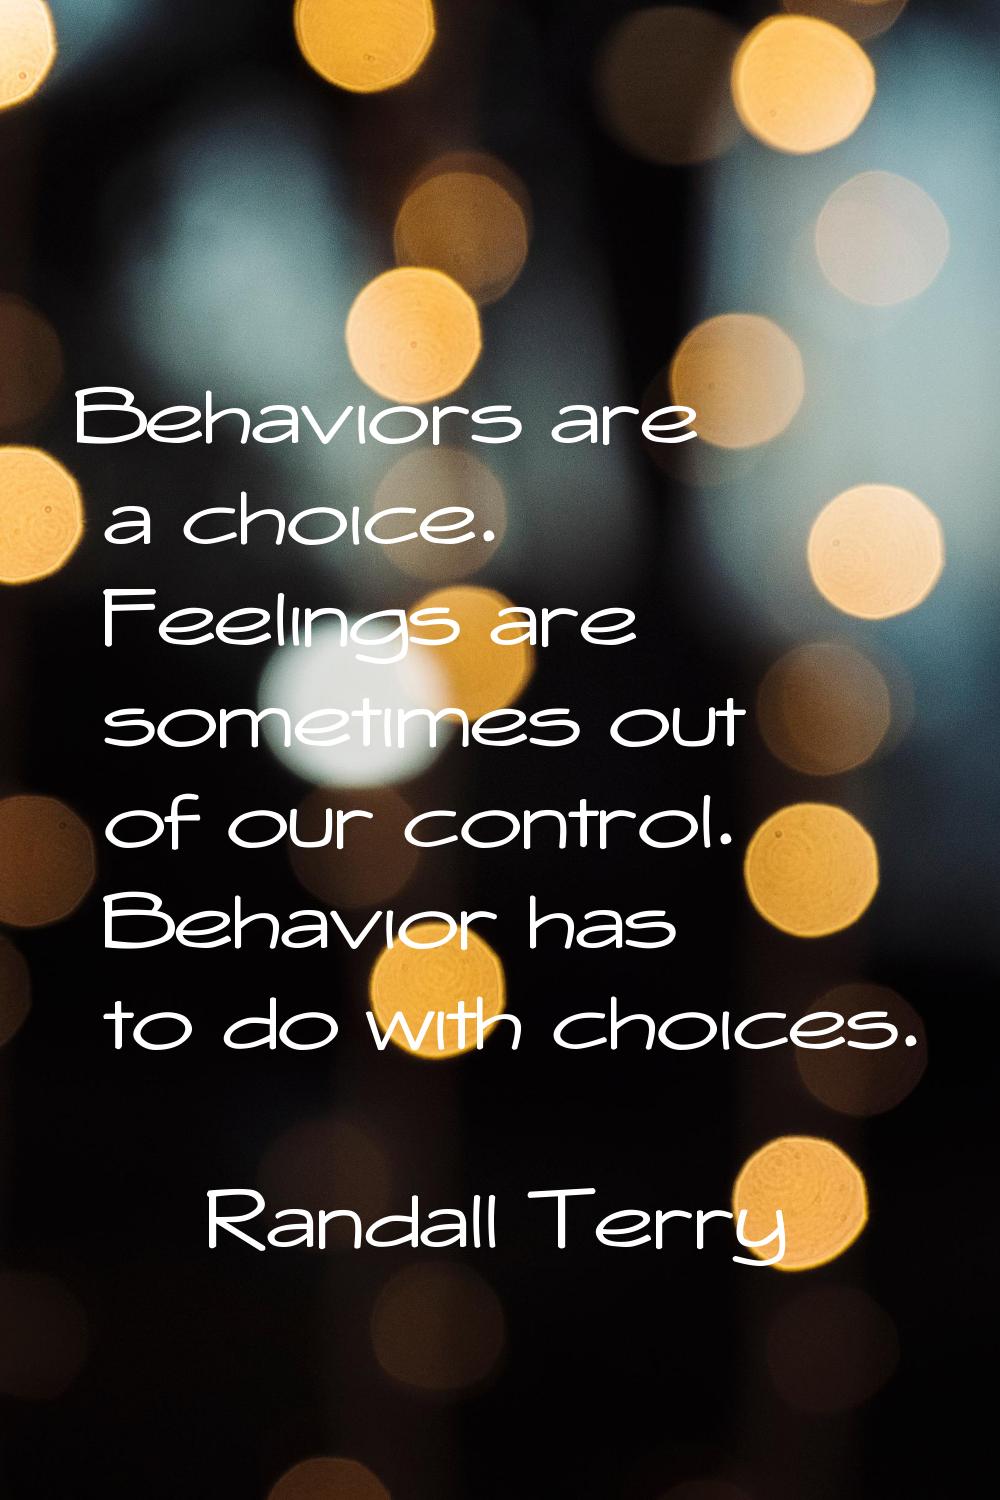 Behaviors are a choice. Feelings are sometimes out of our control. Behavior has to do with choices.